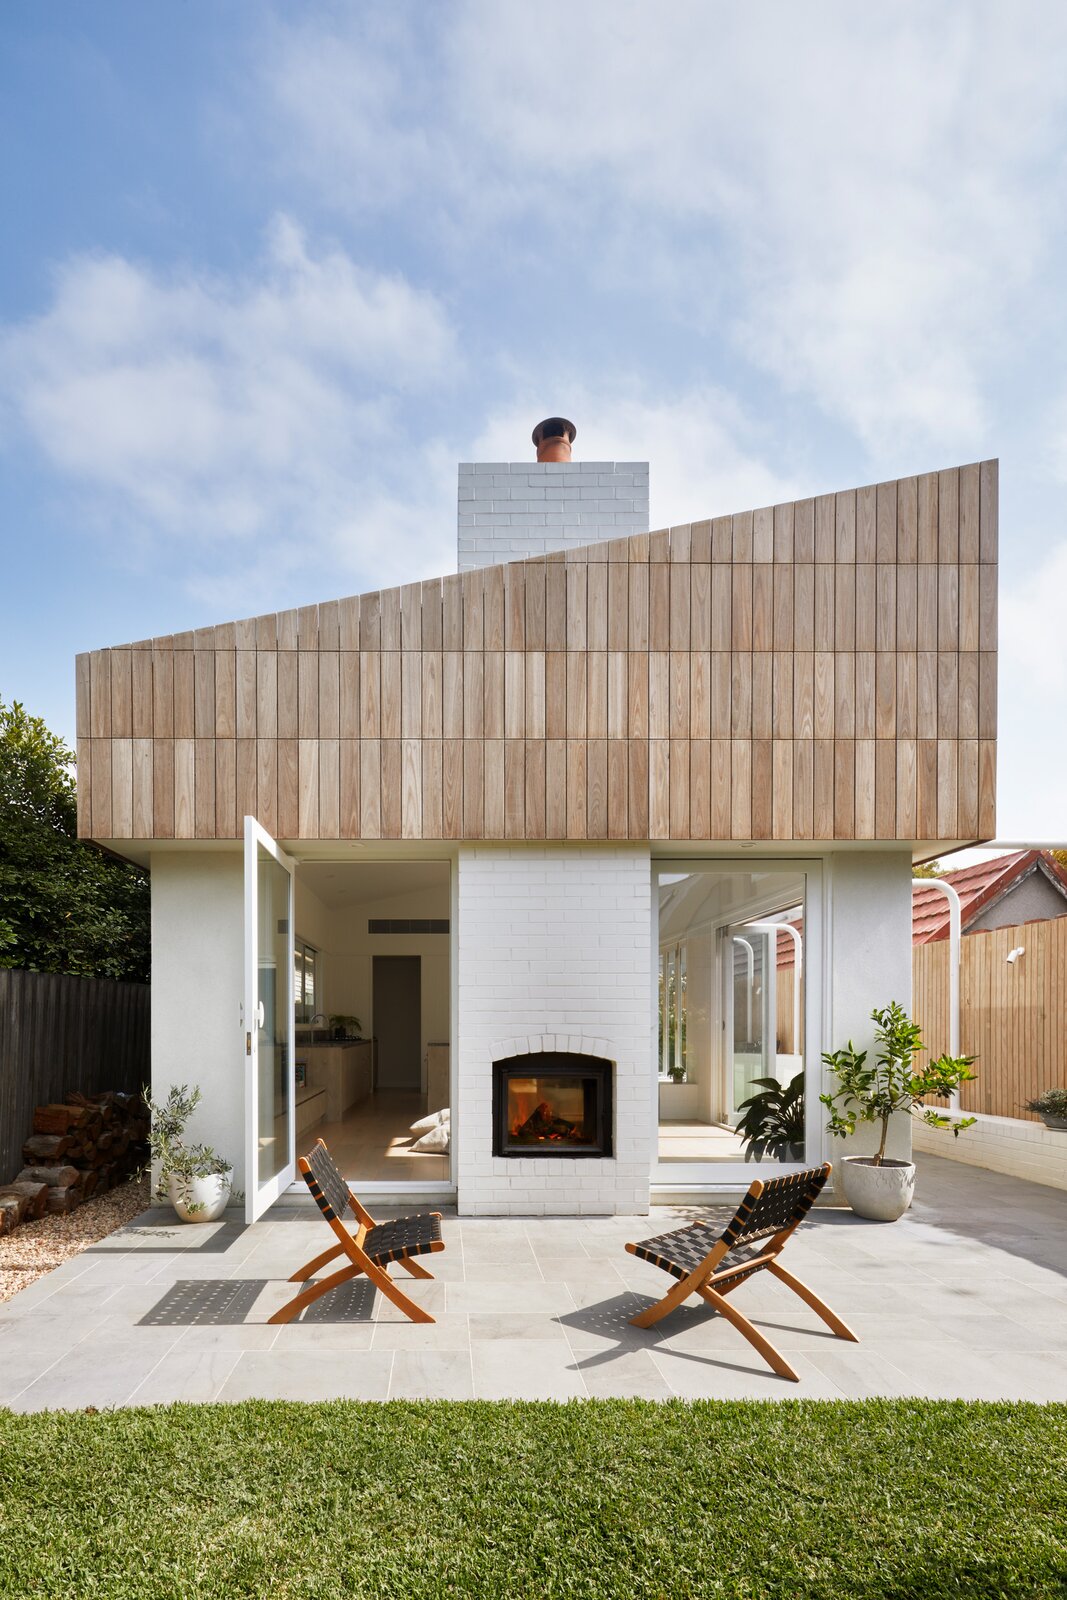 In Melbourne, a Retiree Couple’s Weatherboard Cottage Gets a Luminous Extension